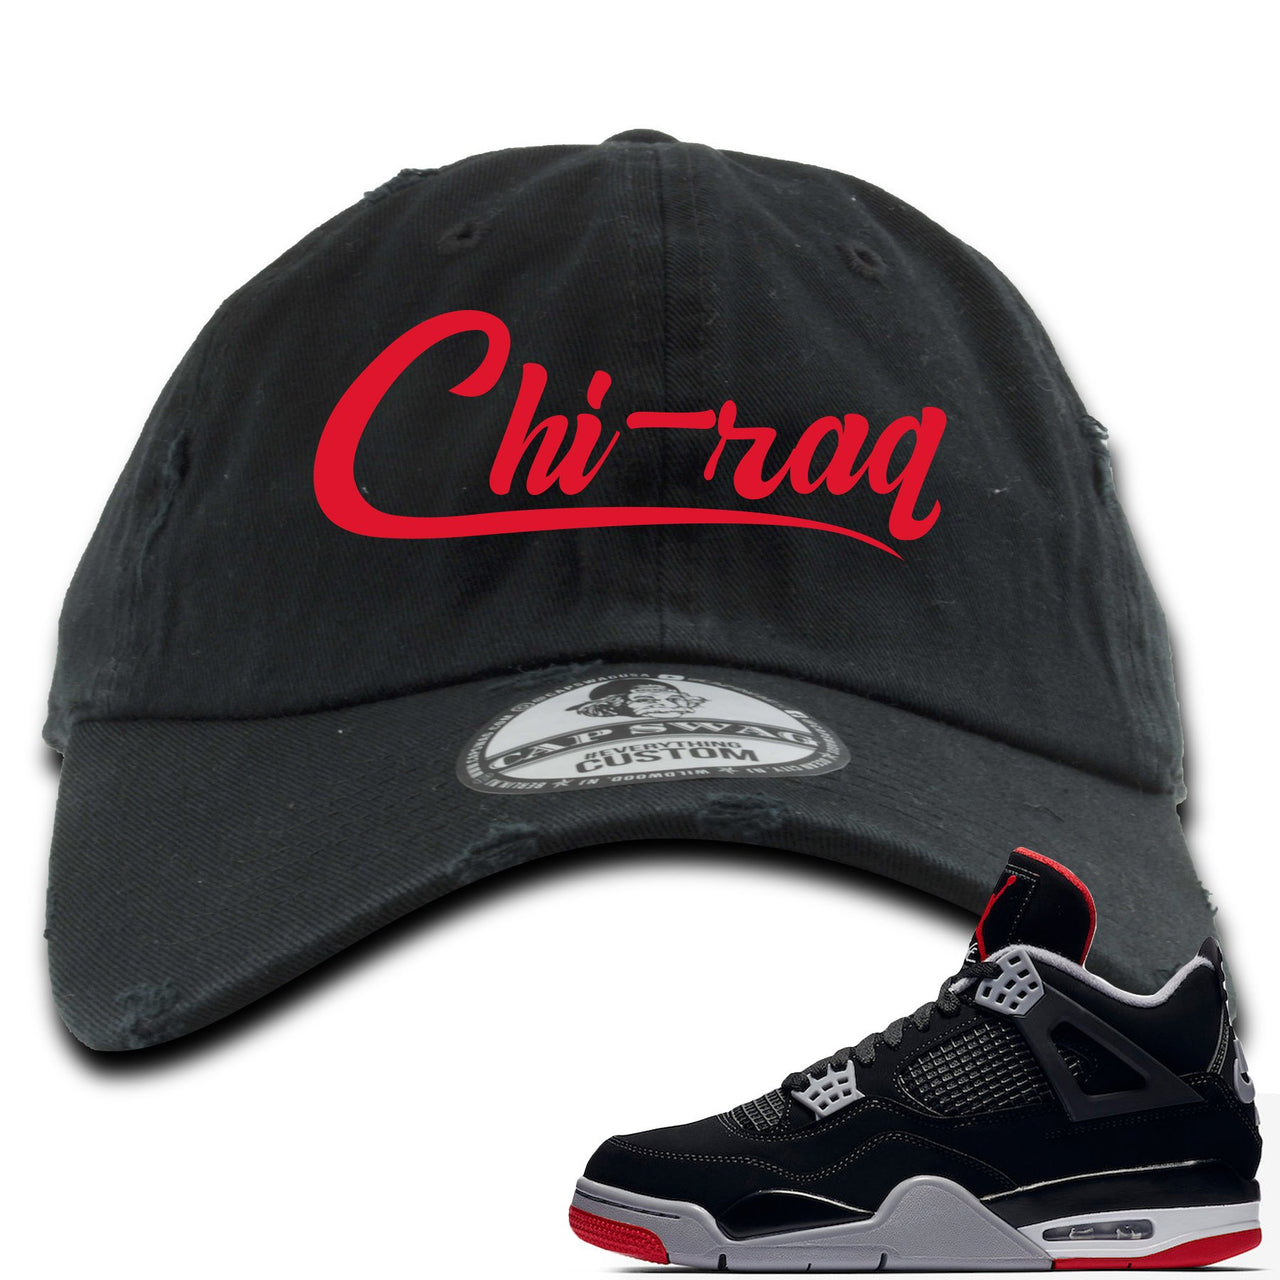 This black and red hat will match great with your Air Jordan 4 Bred shoes